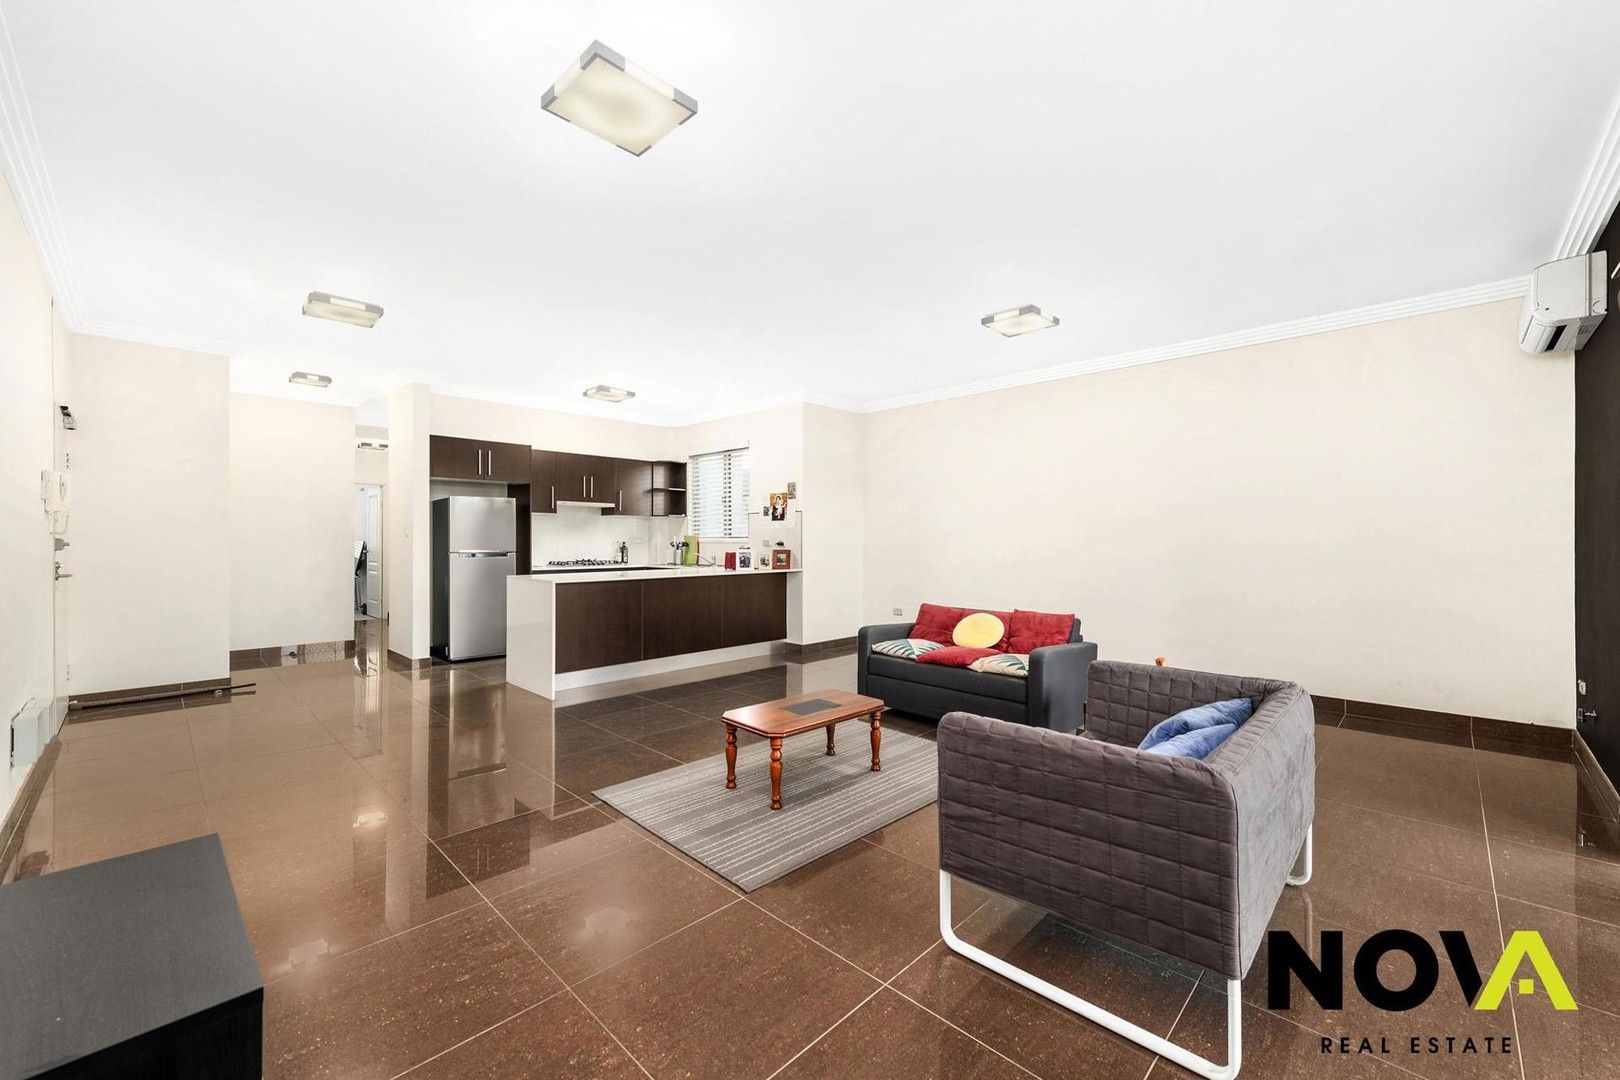 2 bedrooms Apartment / Unit / Flat in 8/48 St Hilliers Road AUBURN NSW, 2144